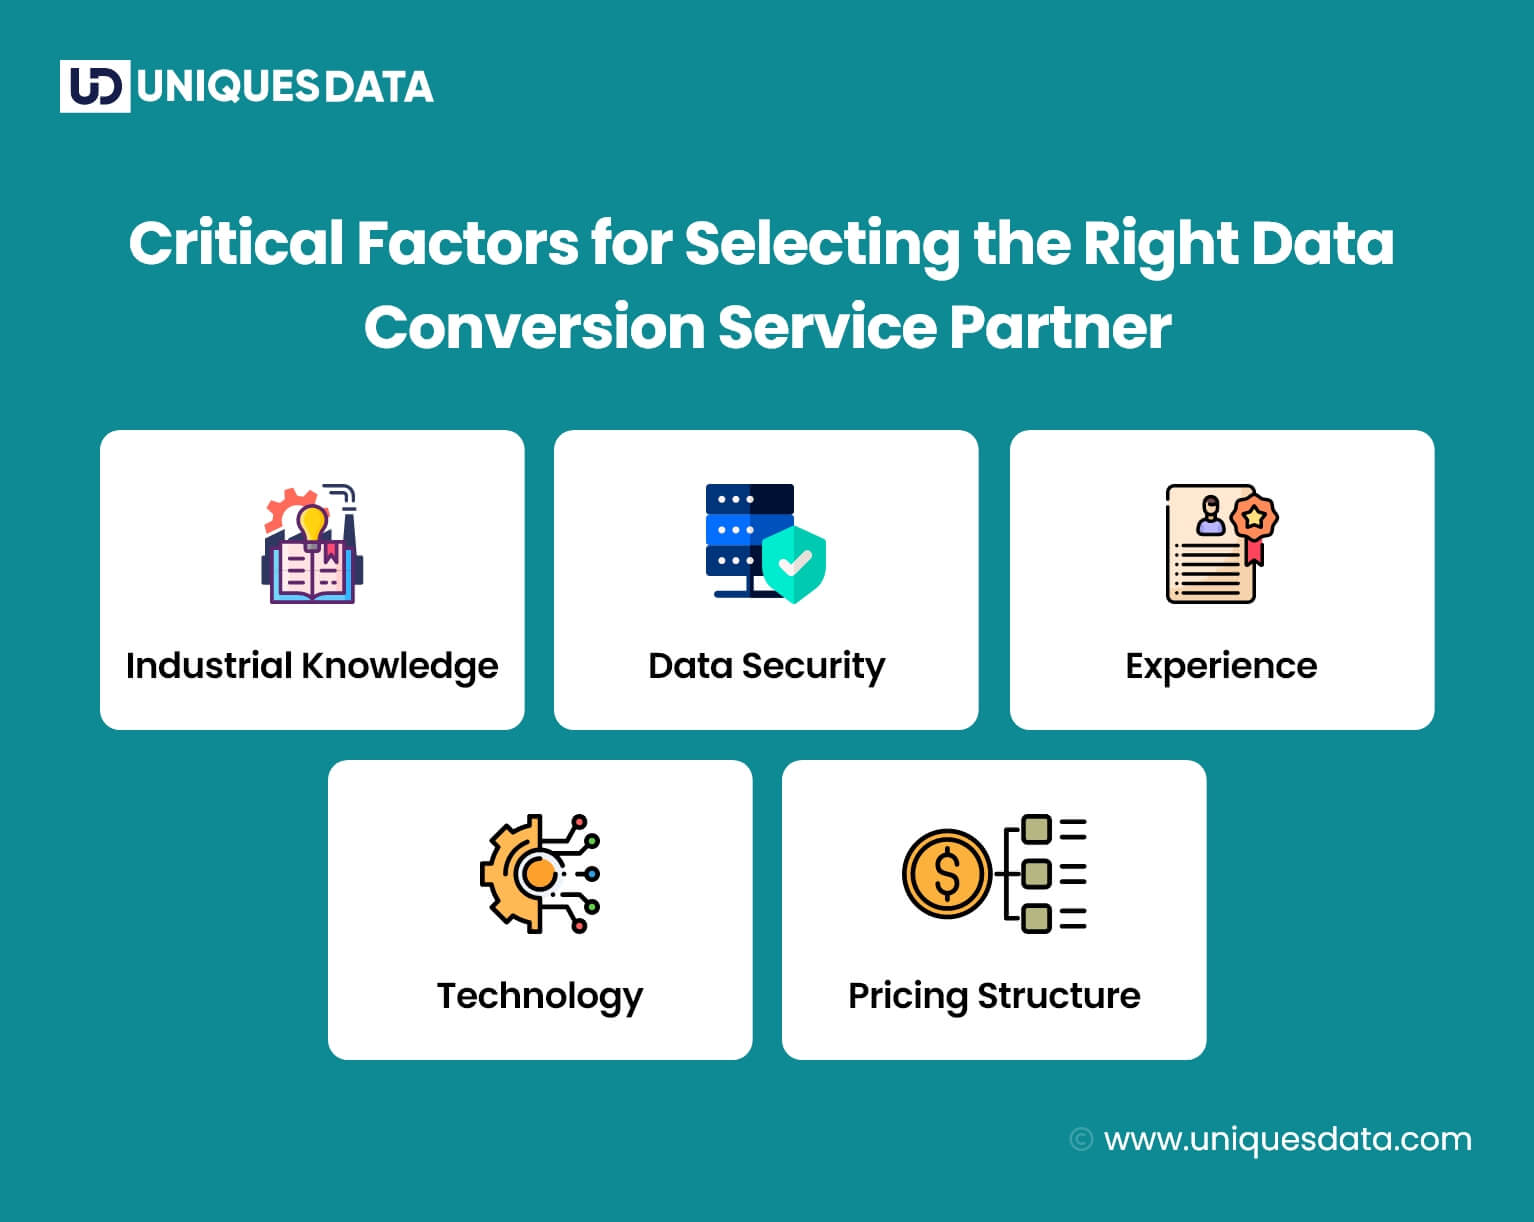 Critical Factors for Selecting the Right Data Conversion Service Partner